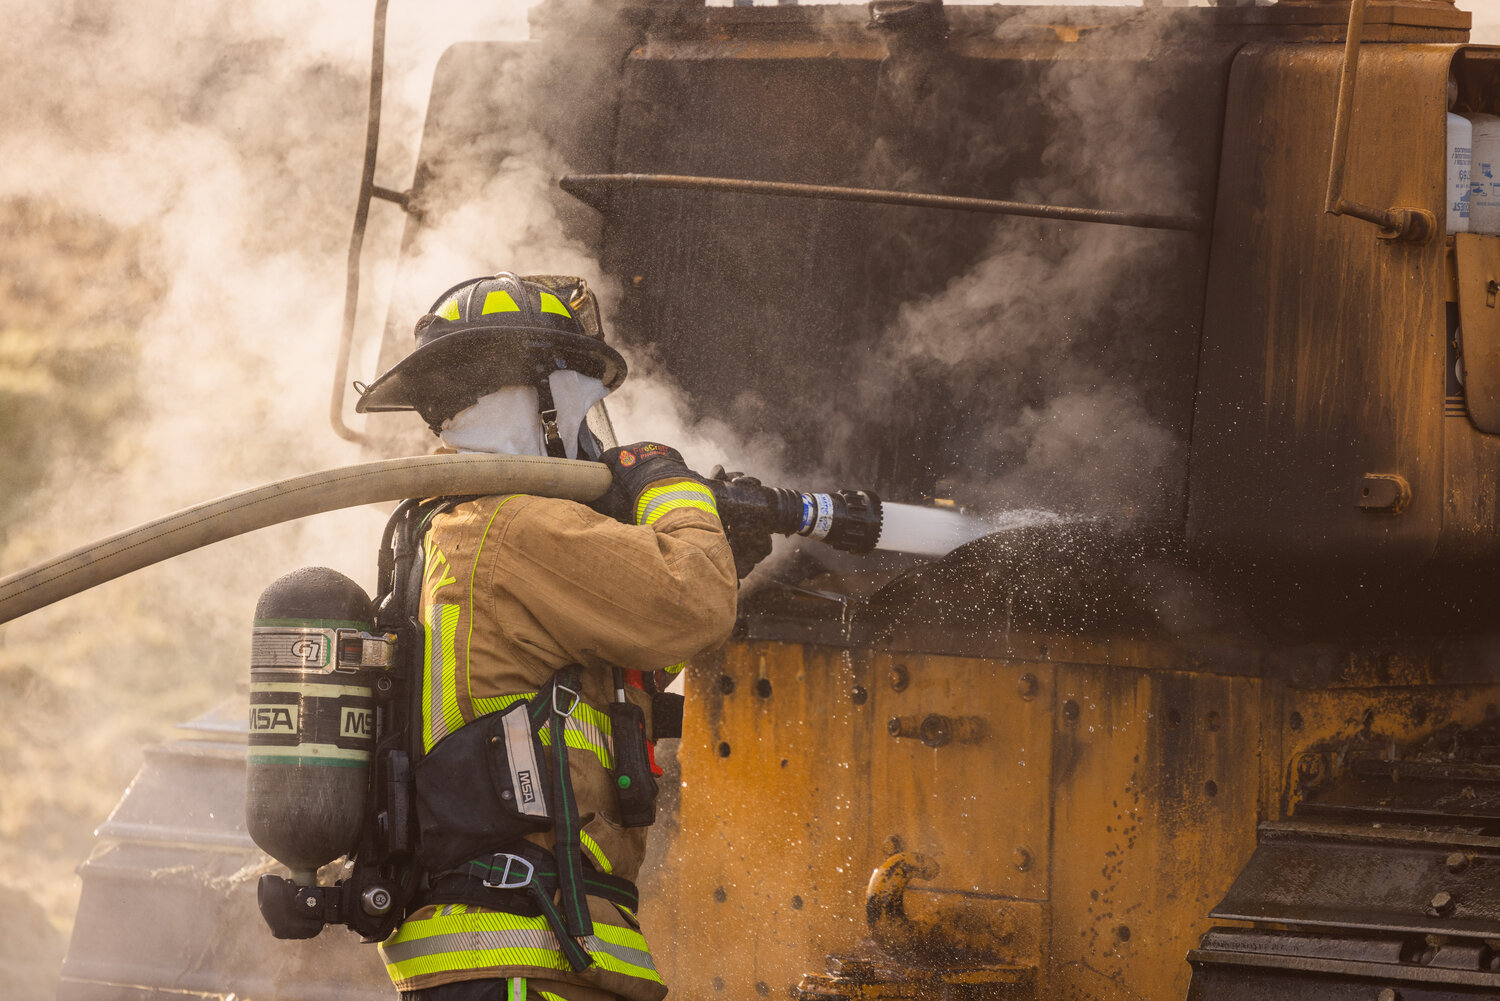 First responders from Lewis County Fire District 6 work to put out a fire inside a piece of machinery at the Osborne Dairy west of Chehalis on Sunday, Sept. 10.